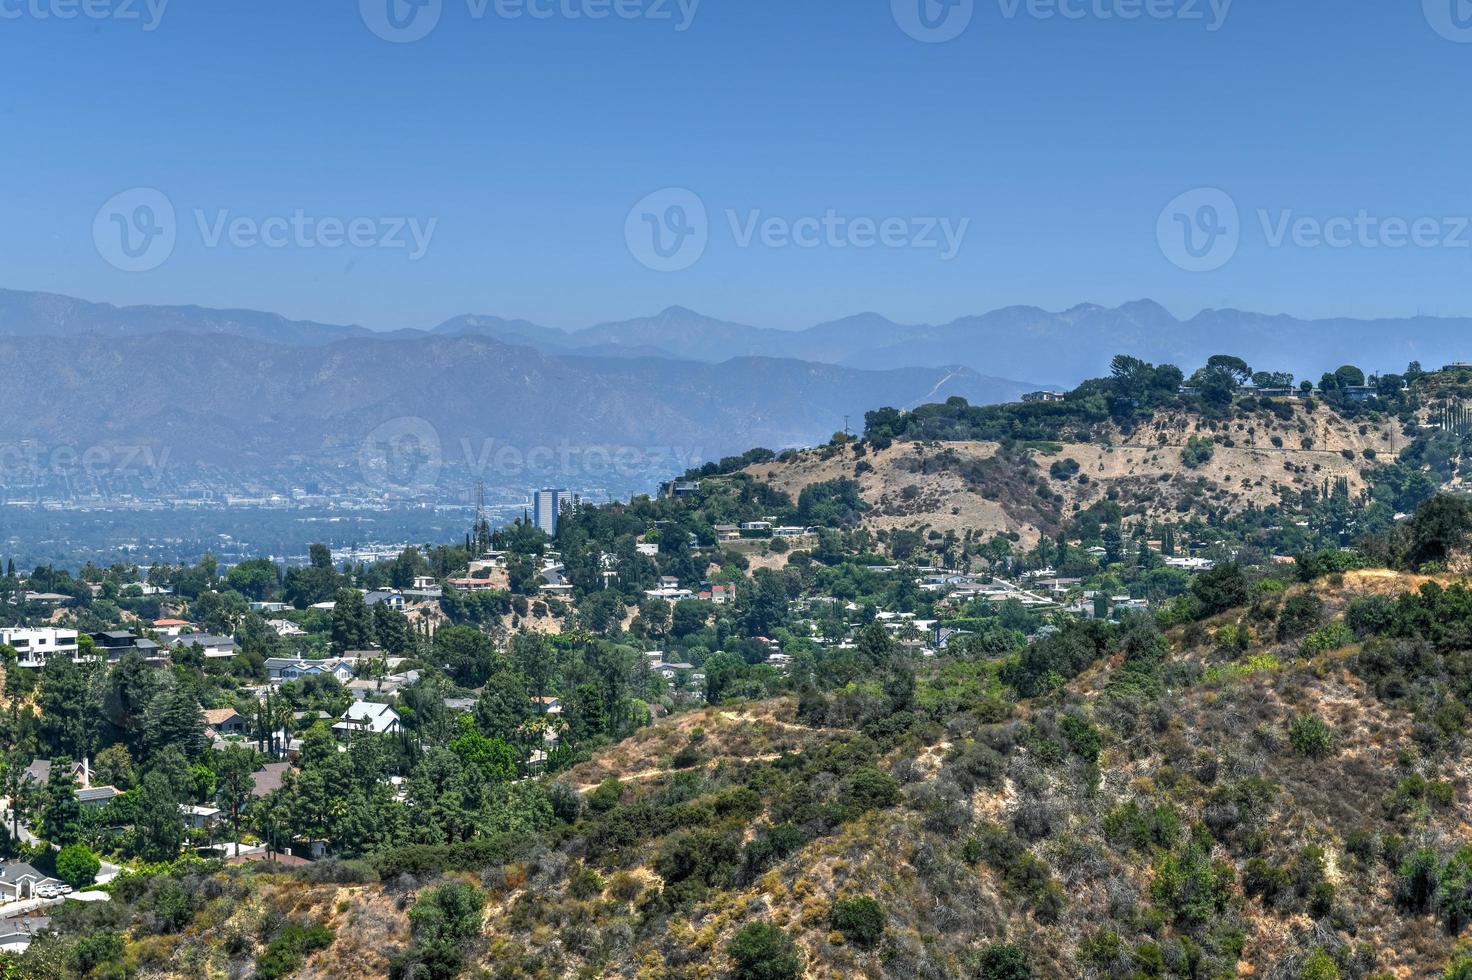 View from the top of Mulholland Drive, Los Angeles, California photo